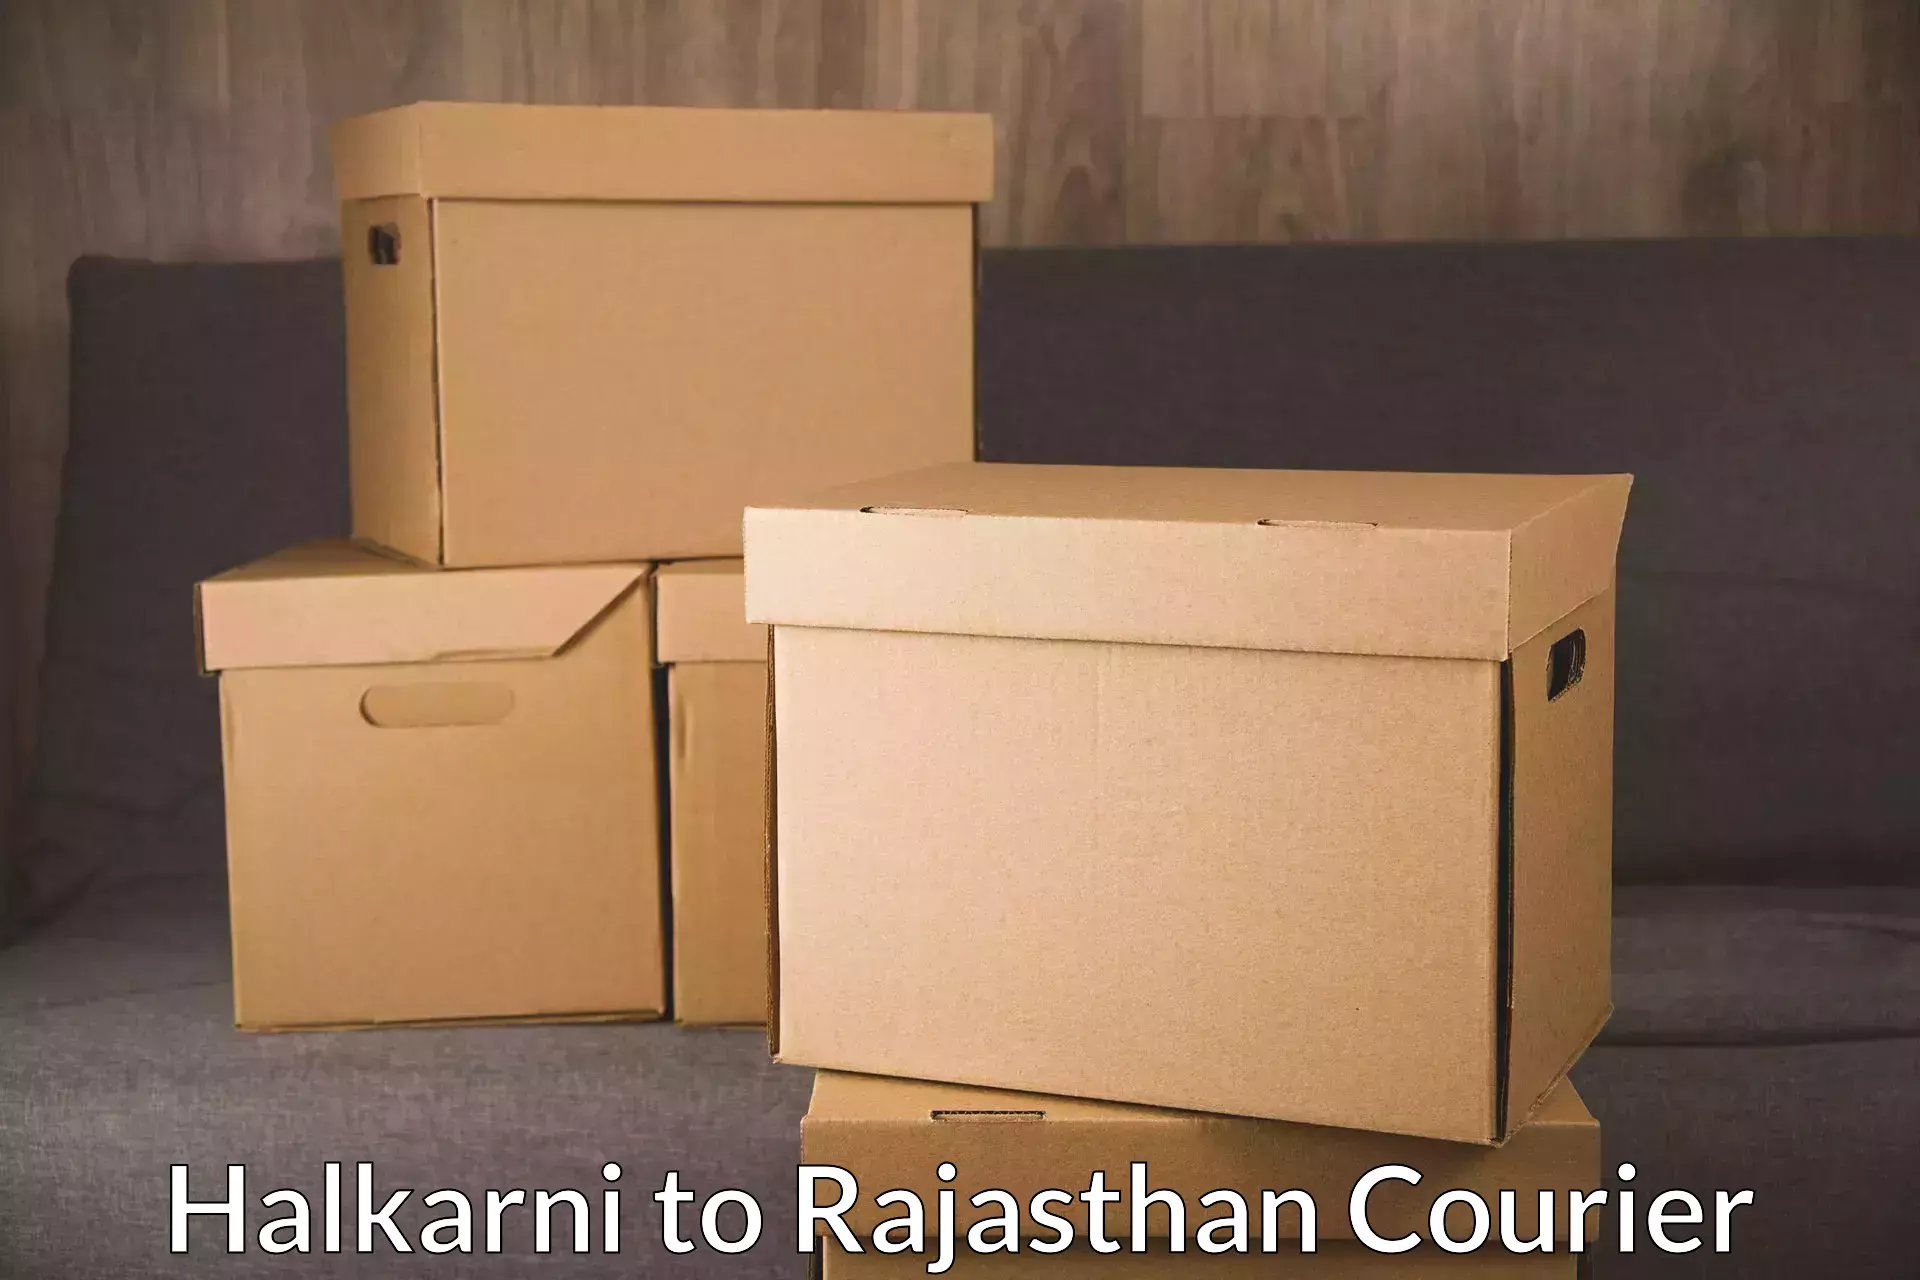 Next-day delivery options Halkarni to Rajasthan